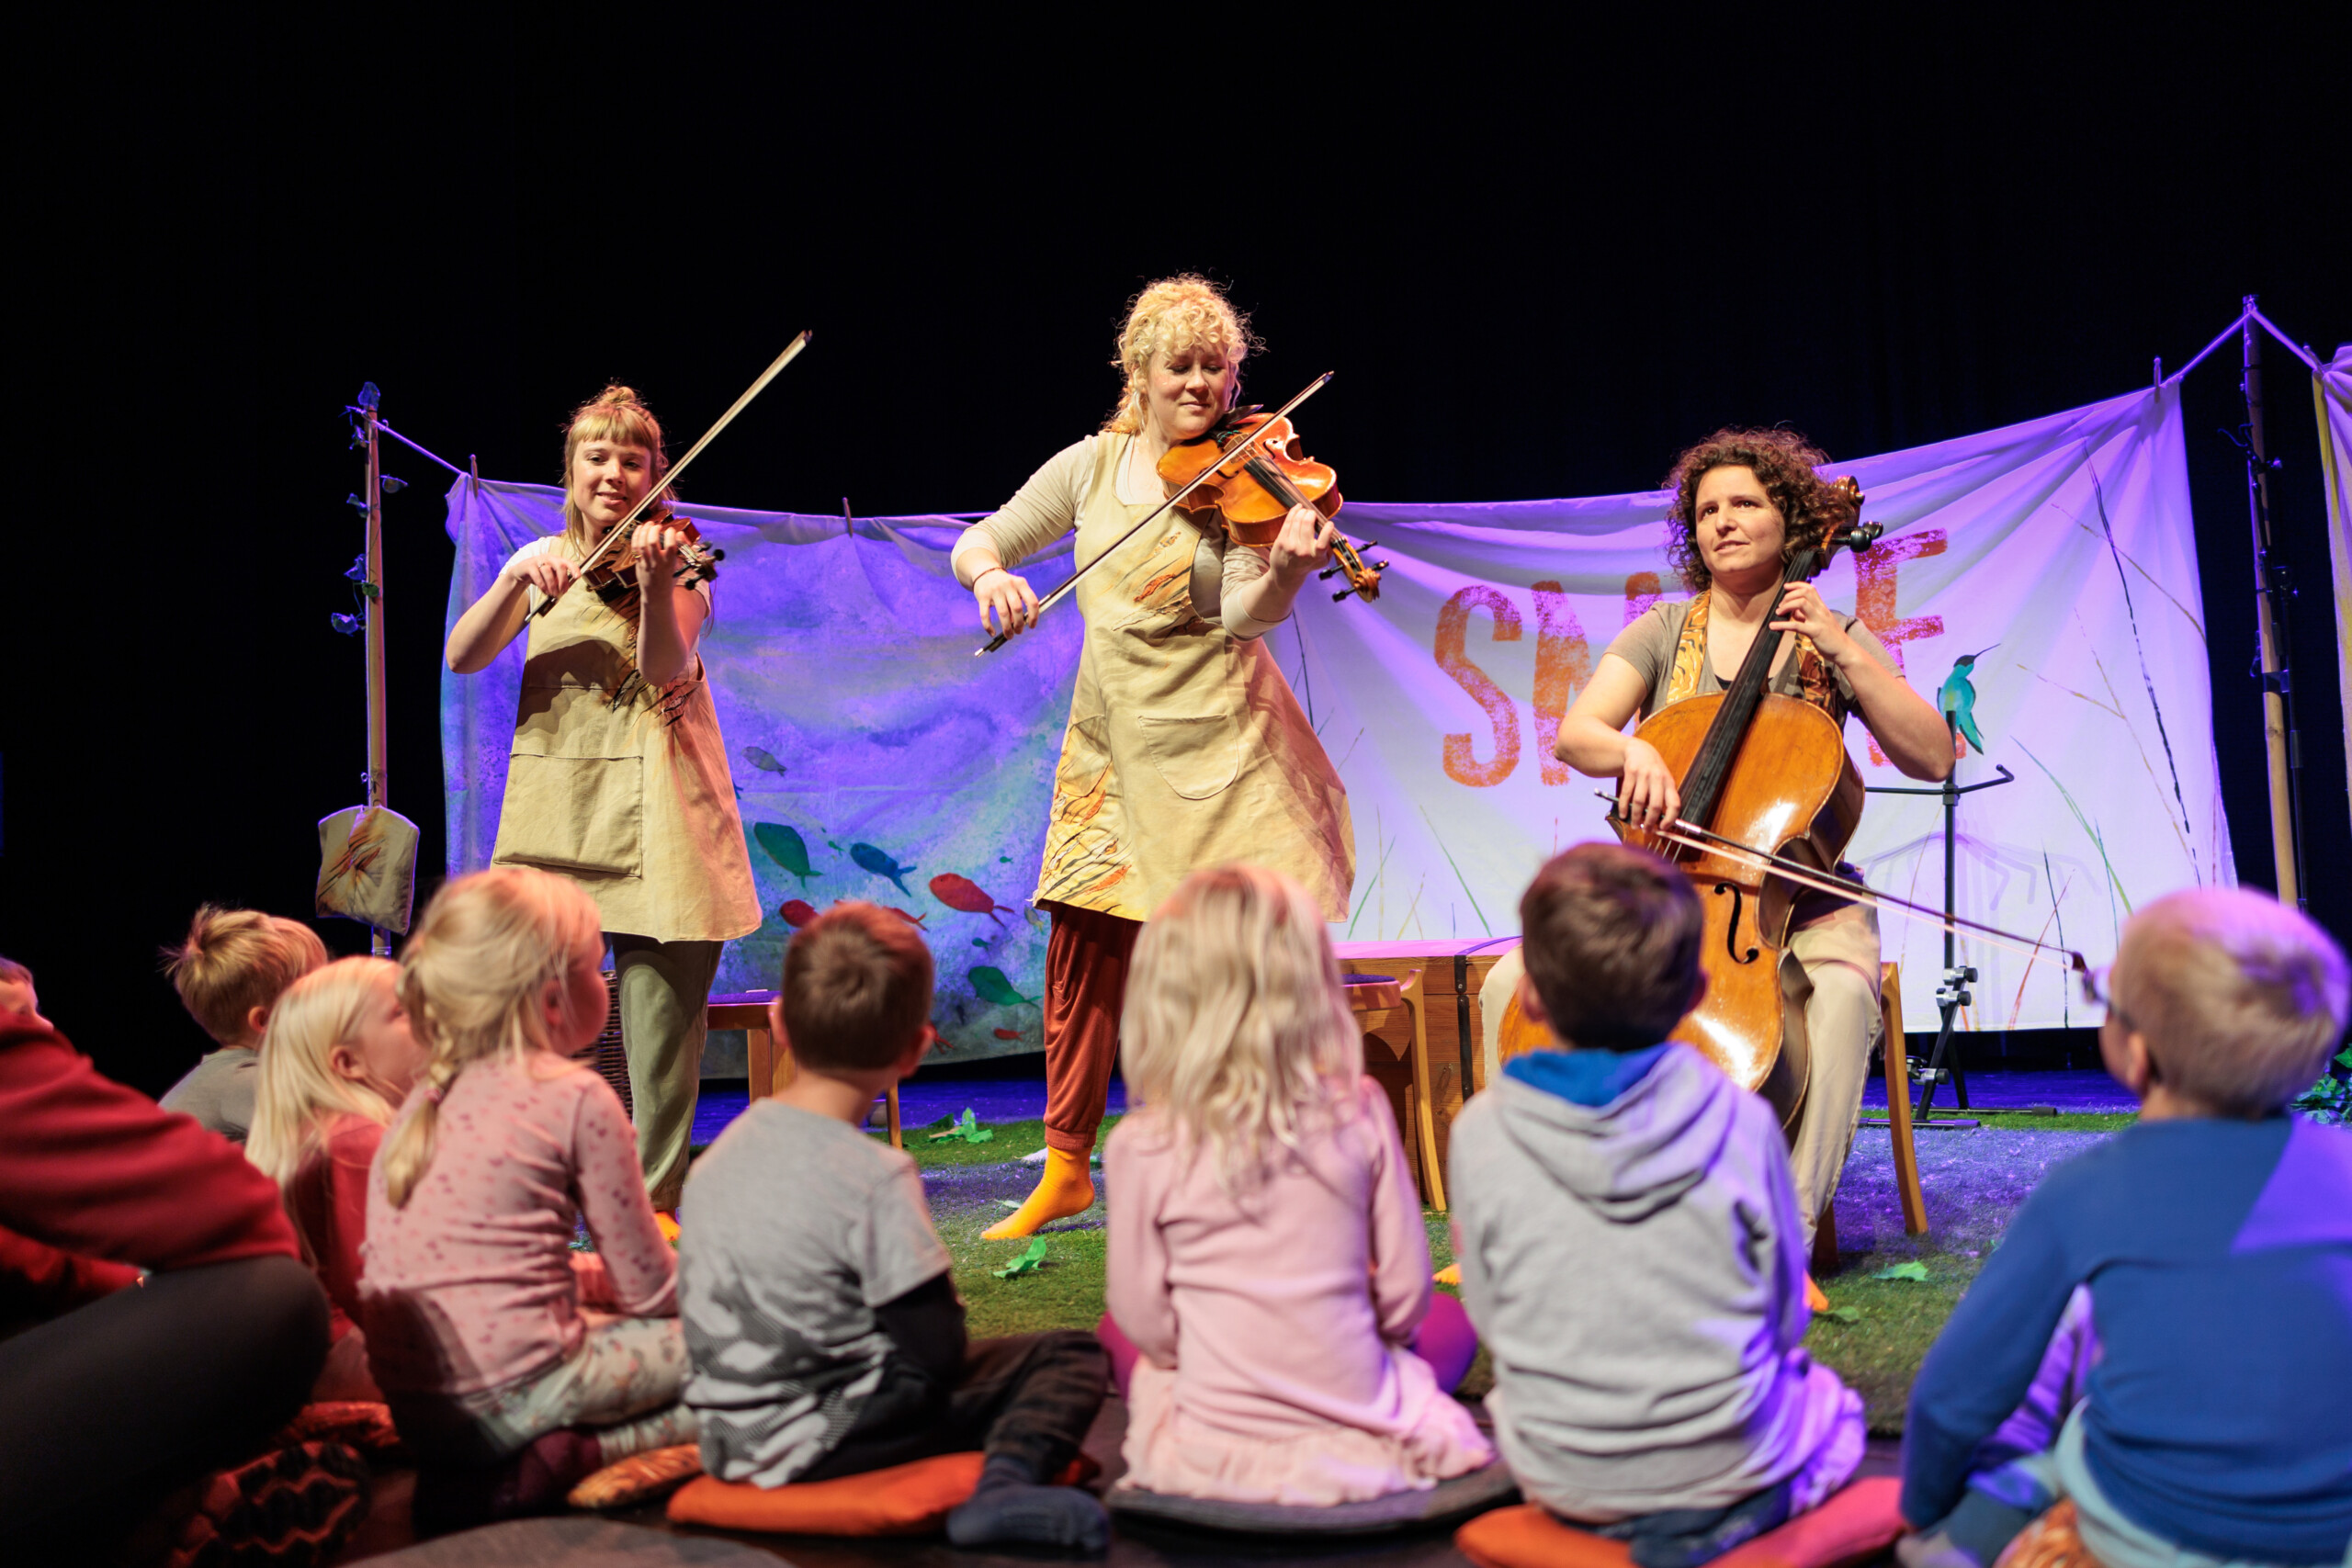 Musicians play to an audience of young children